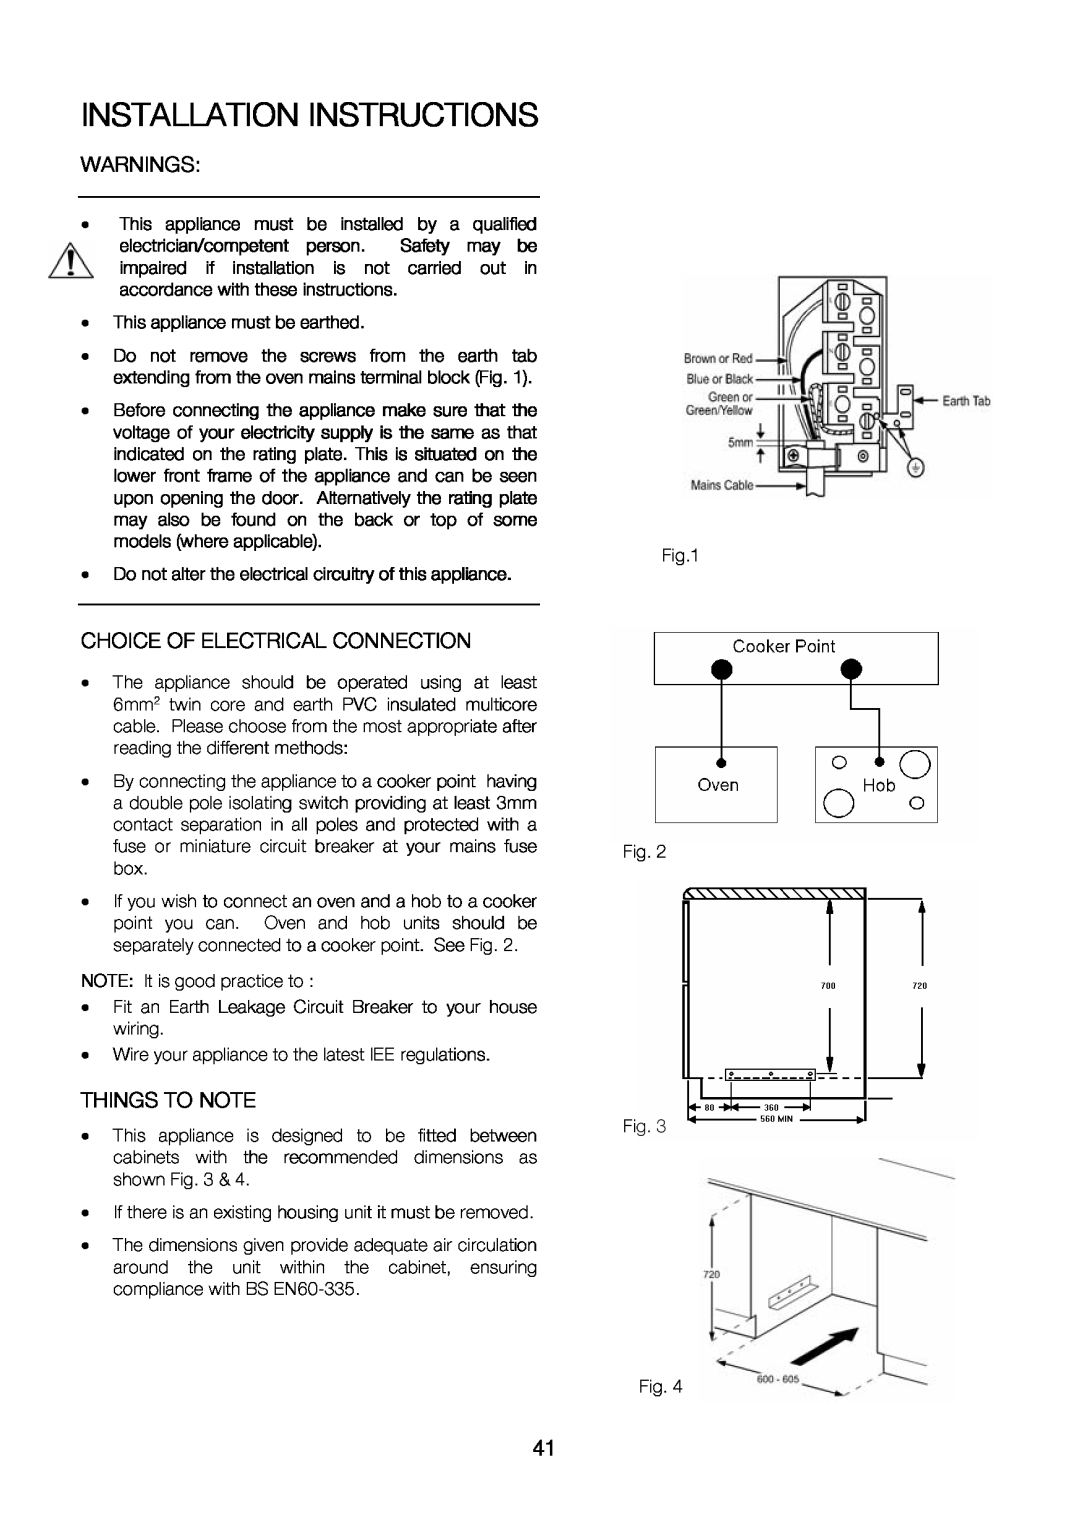 Zanussi ZOU 575 Fig.1 Fig, Warnings, Thisappliance ovearhed, IfTheisexisinghousingunititmustbe, Installation Instructions 